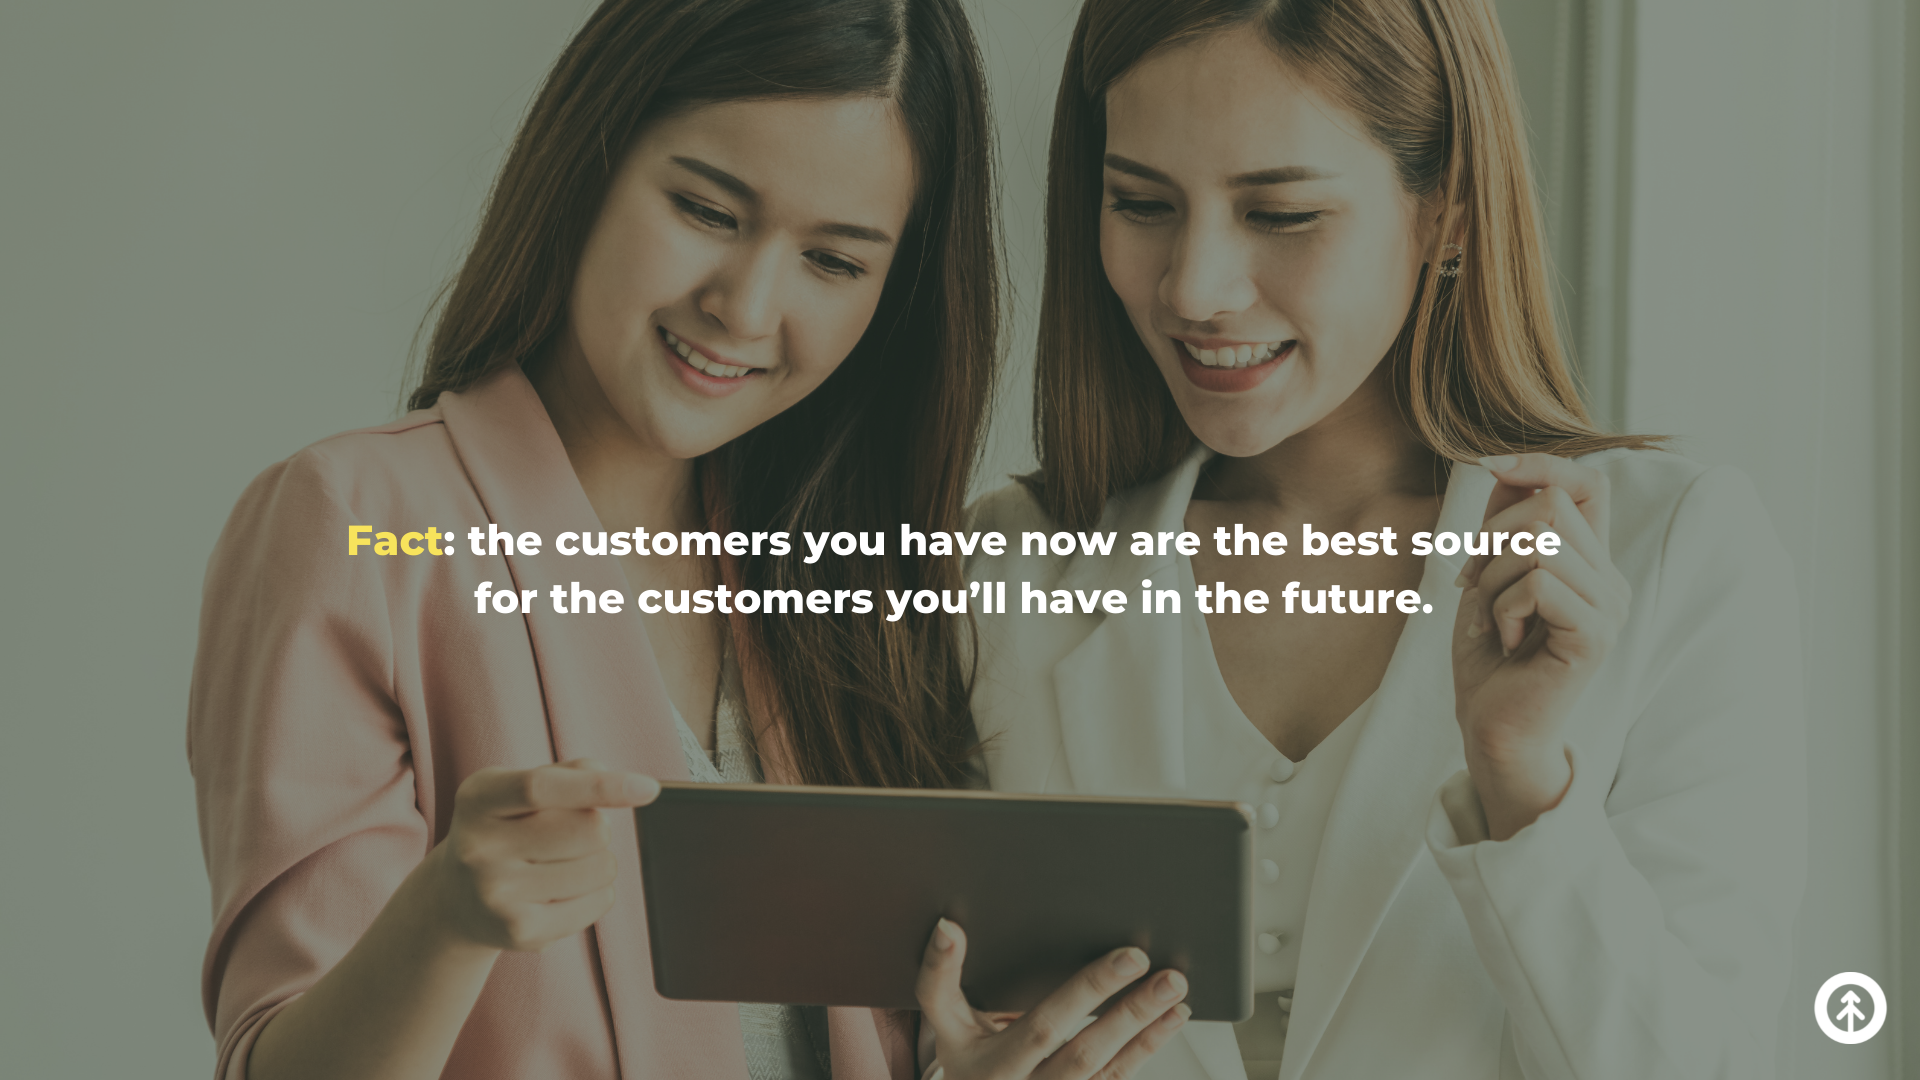 Two executives share good information about a client on a mobile device with a quote about customer referrals from Growth Marketing Firm.